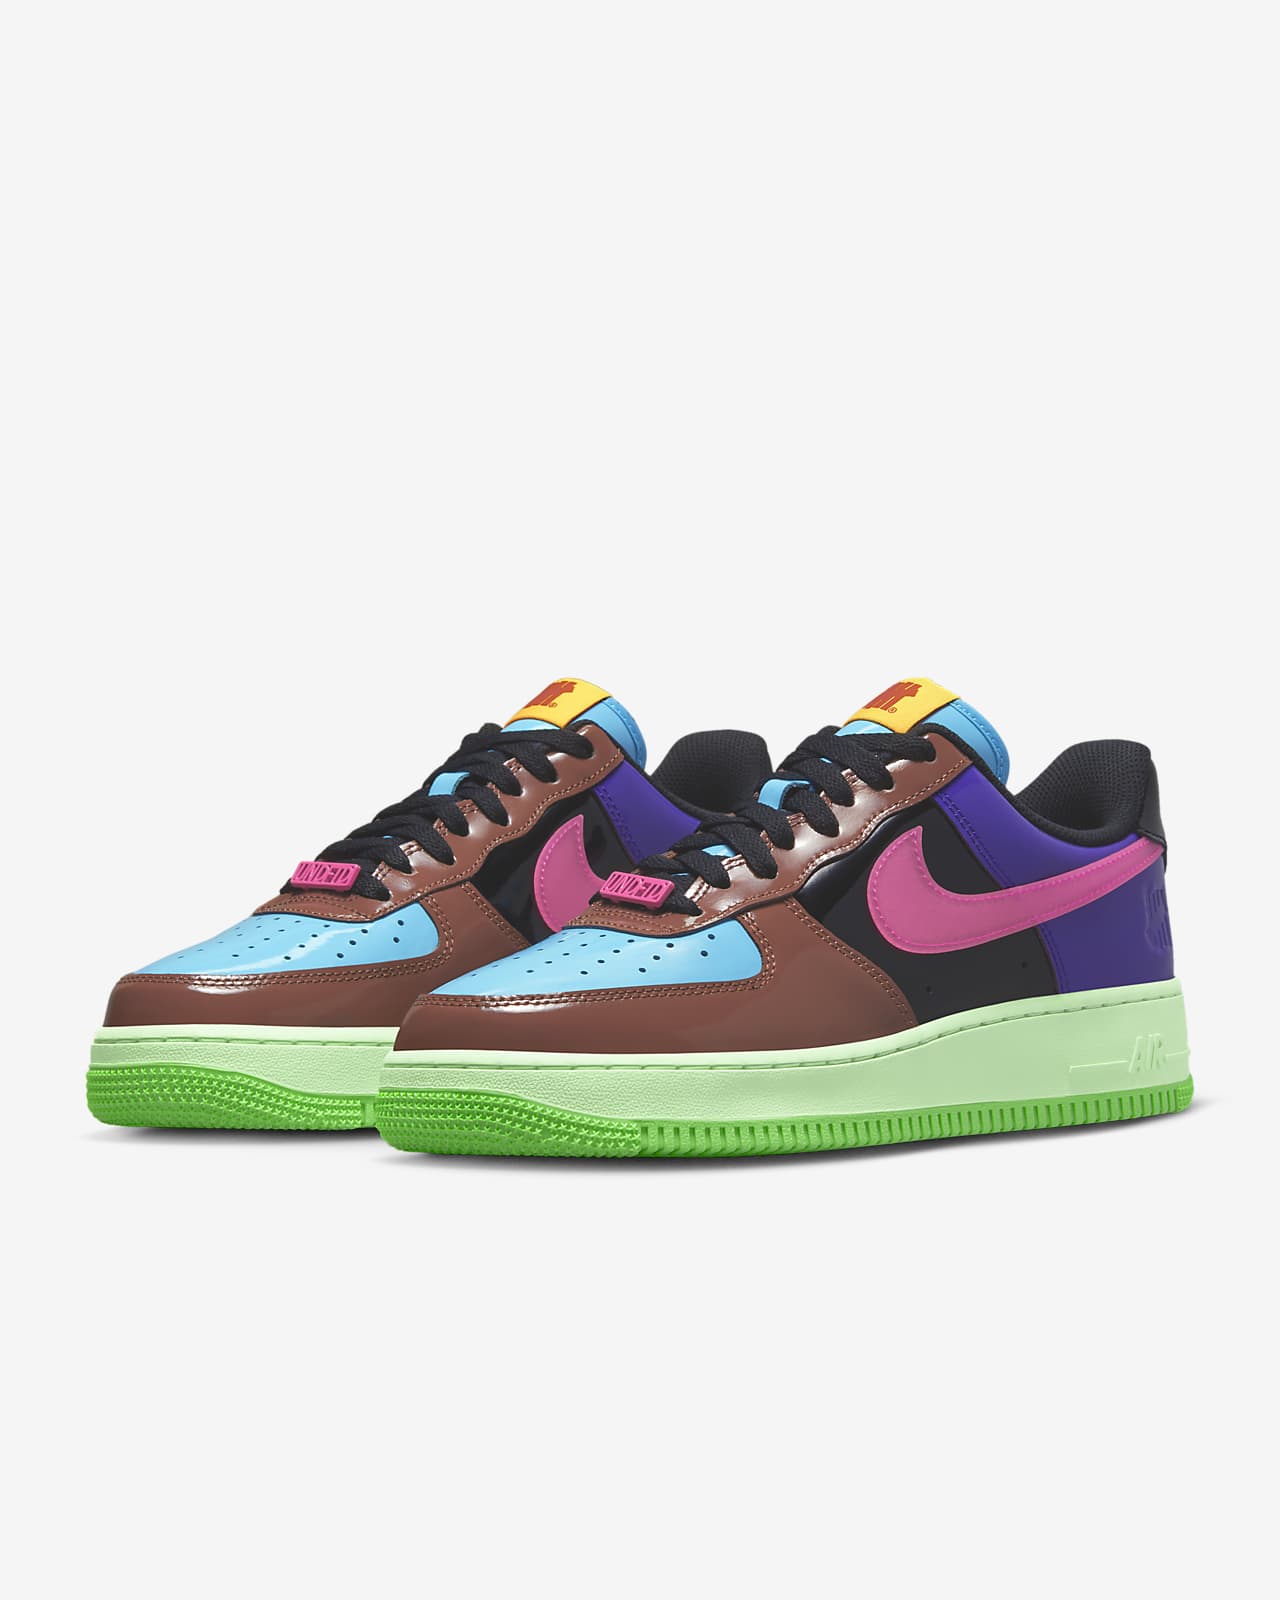 Nike Air Force 1 Low x UNDEFEATED Men's Shoes